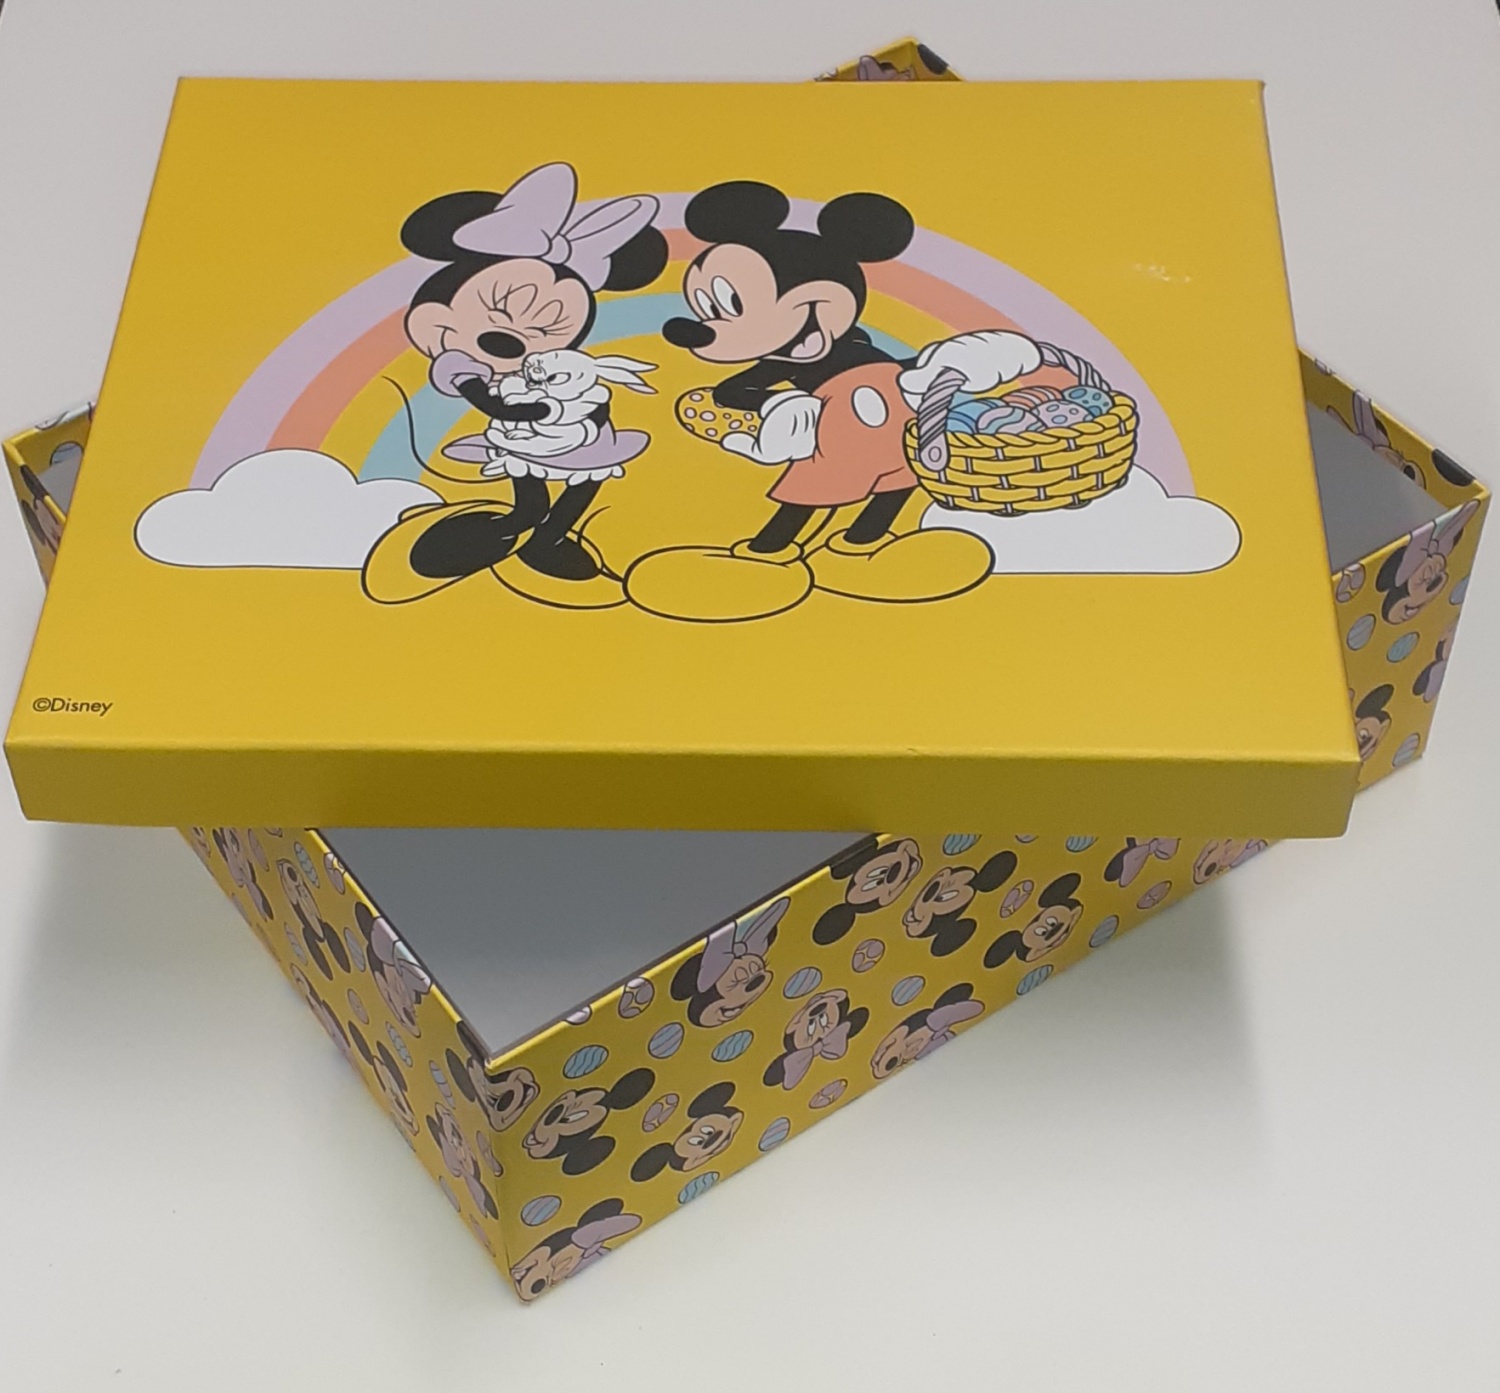 George Disney Mickey & Minnie Mouse Large Gift Box RRP £2.99 CLEARANCE XL £1.99